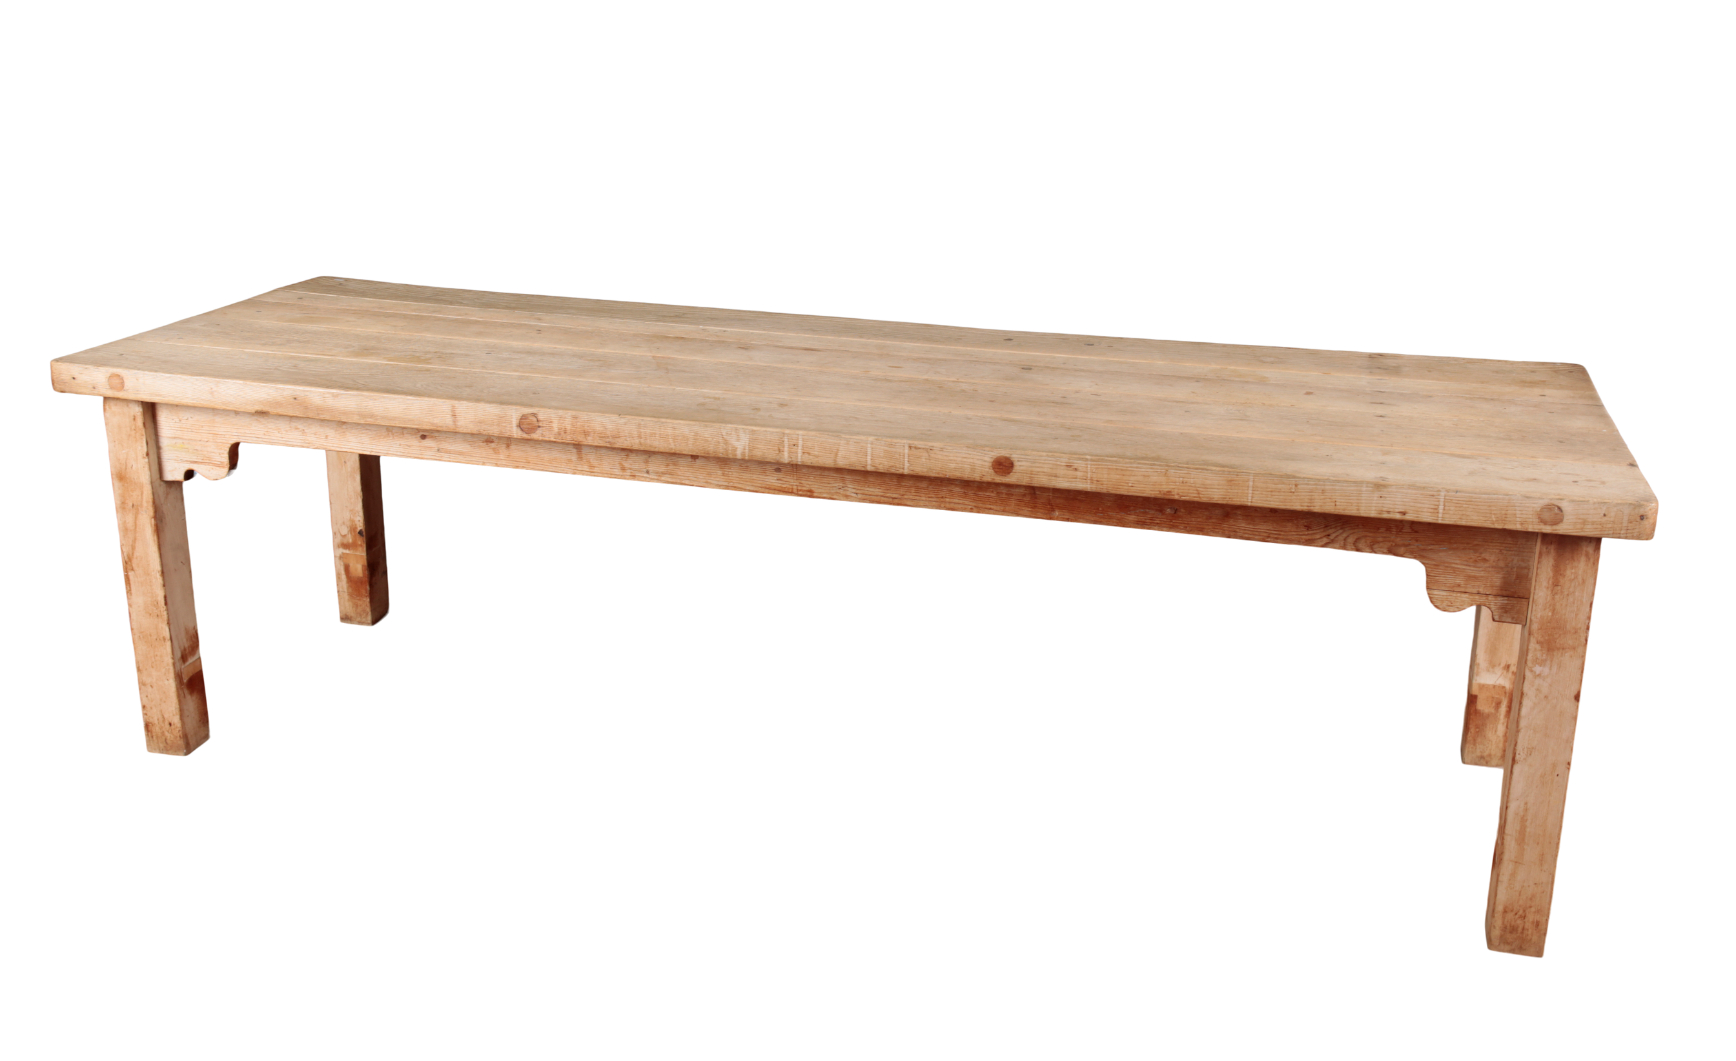 A PALE OAK DINING TABLE - Image 2 of 3